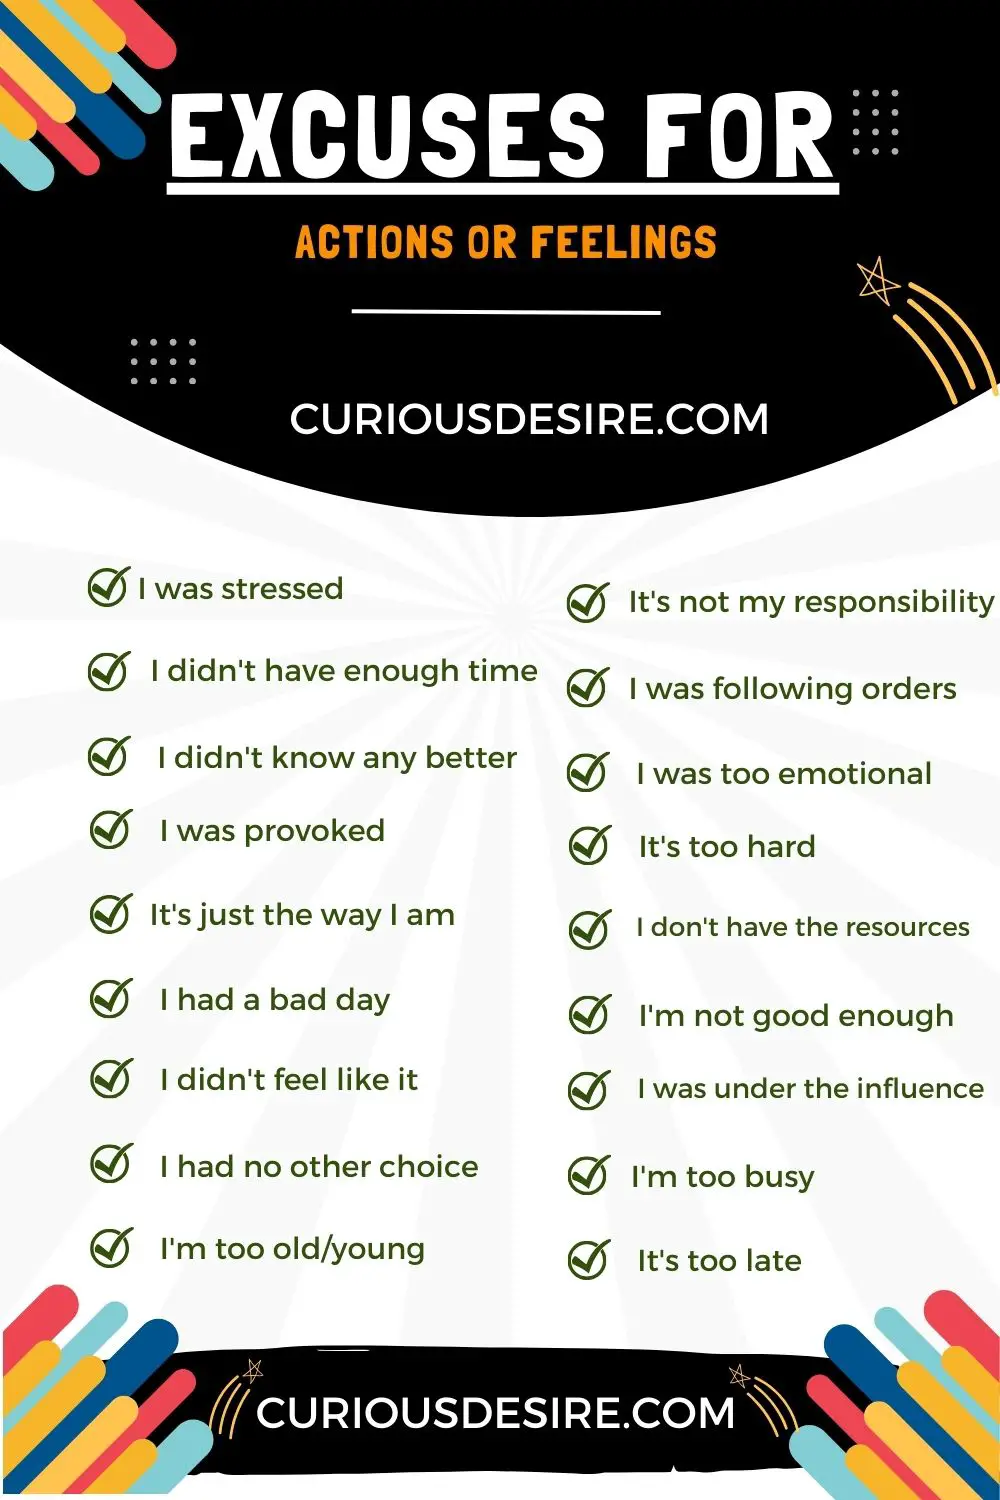 Top 30 Real Time Excuses For Actions Or Feelings